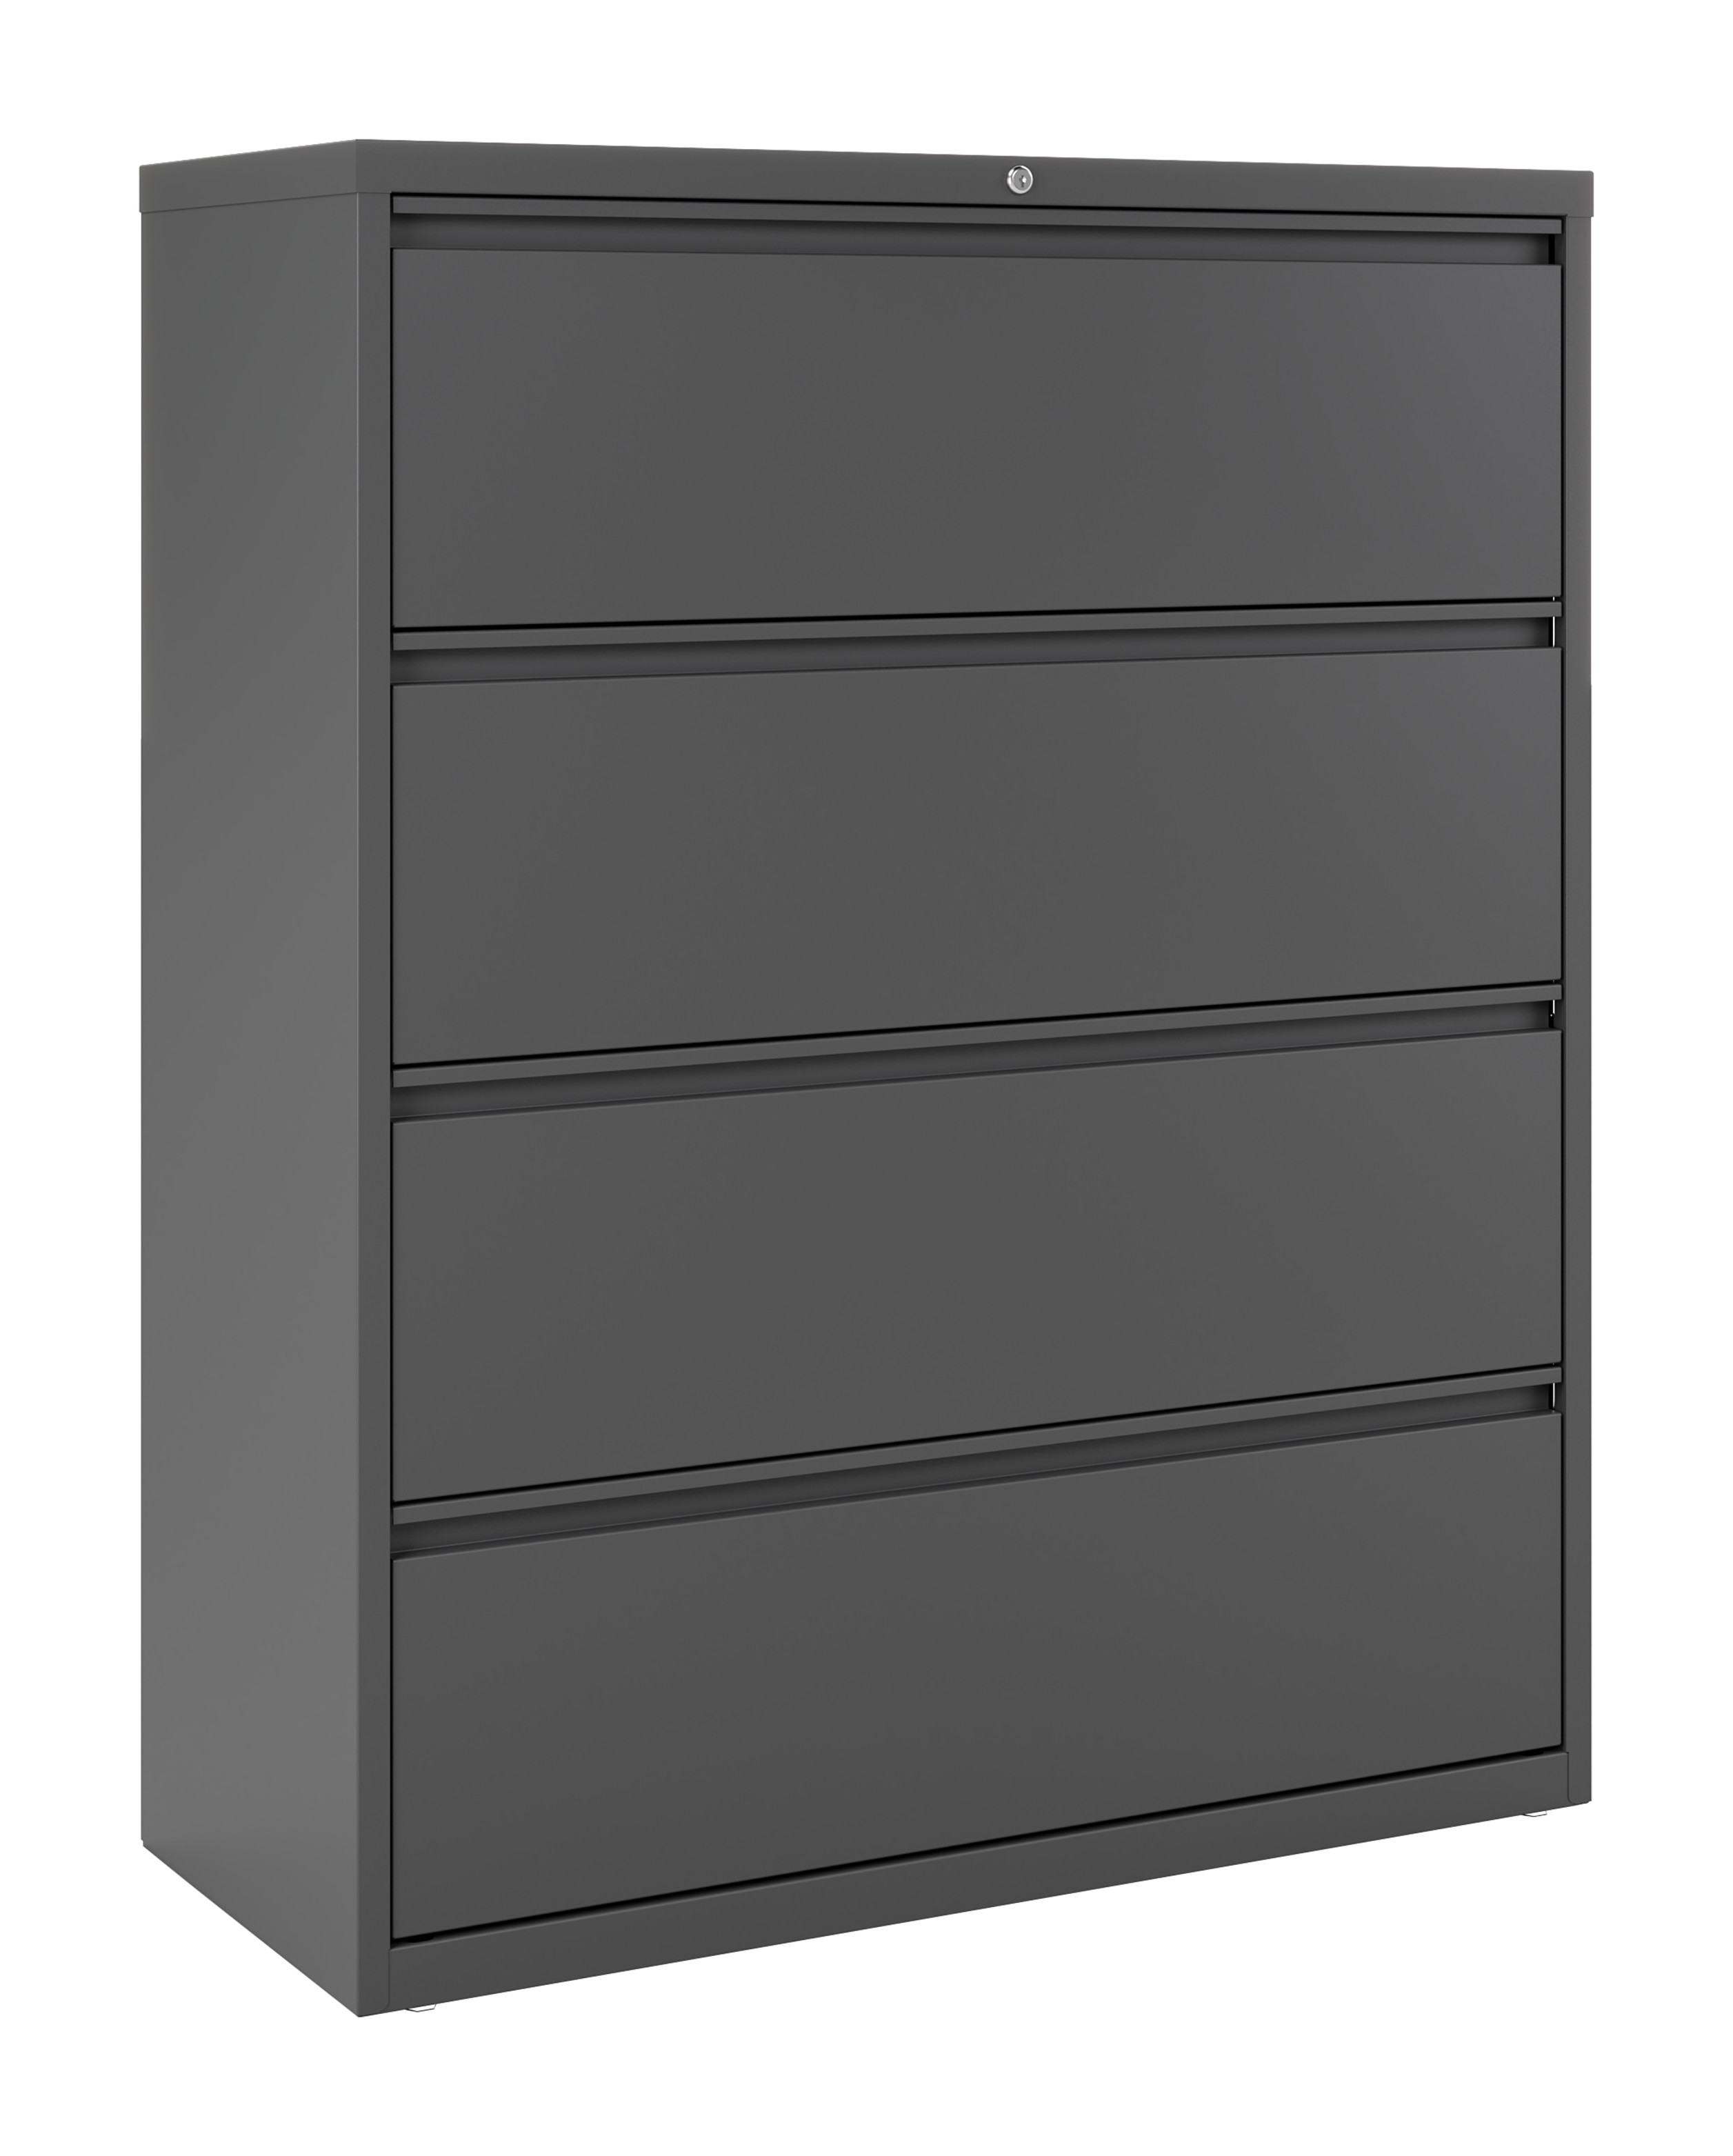 Hirsh 42 inch Wide 4 Drawer Metal Lateral File Cabinet for Home and Office, Holds Letter, Legal and A4 Hanging Folders, Charcoal - image 1 of 6